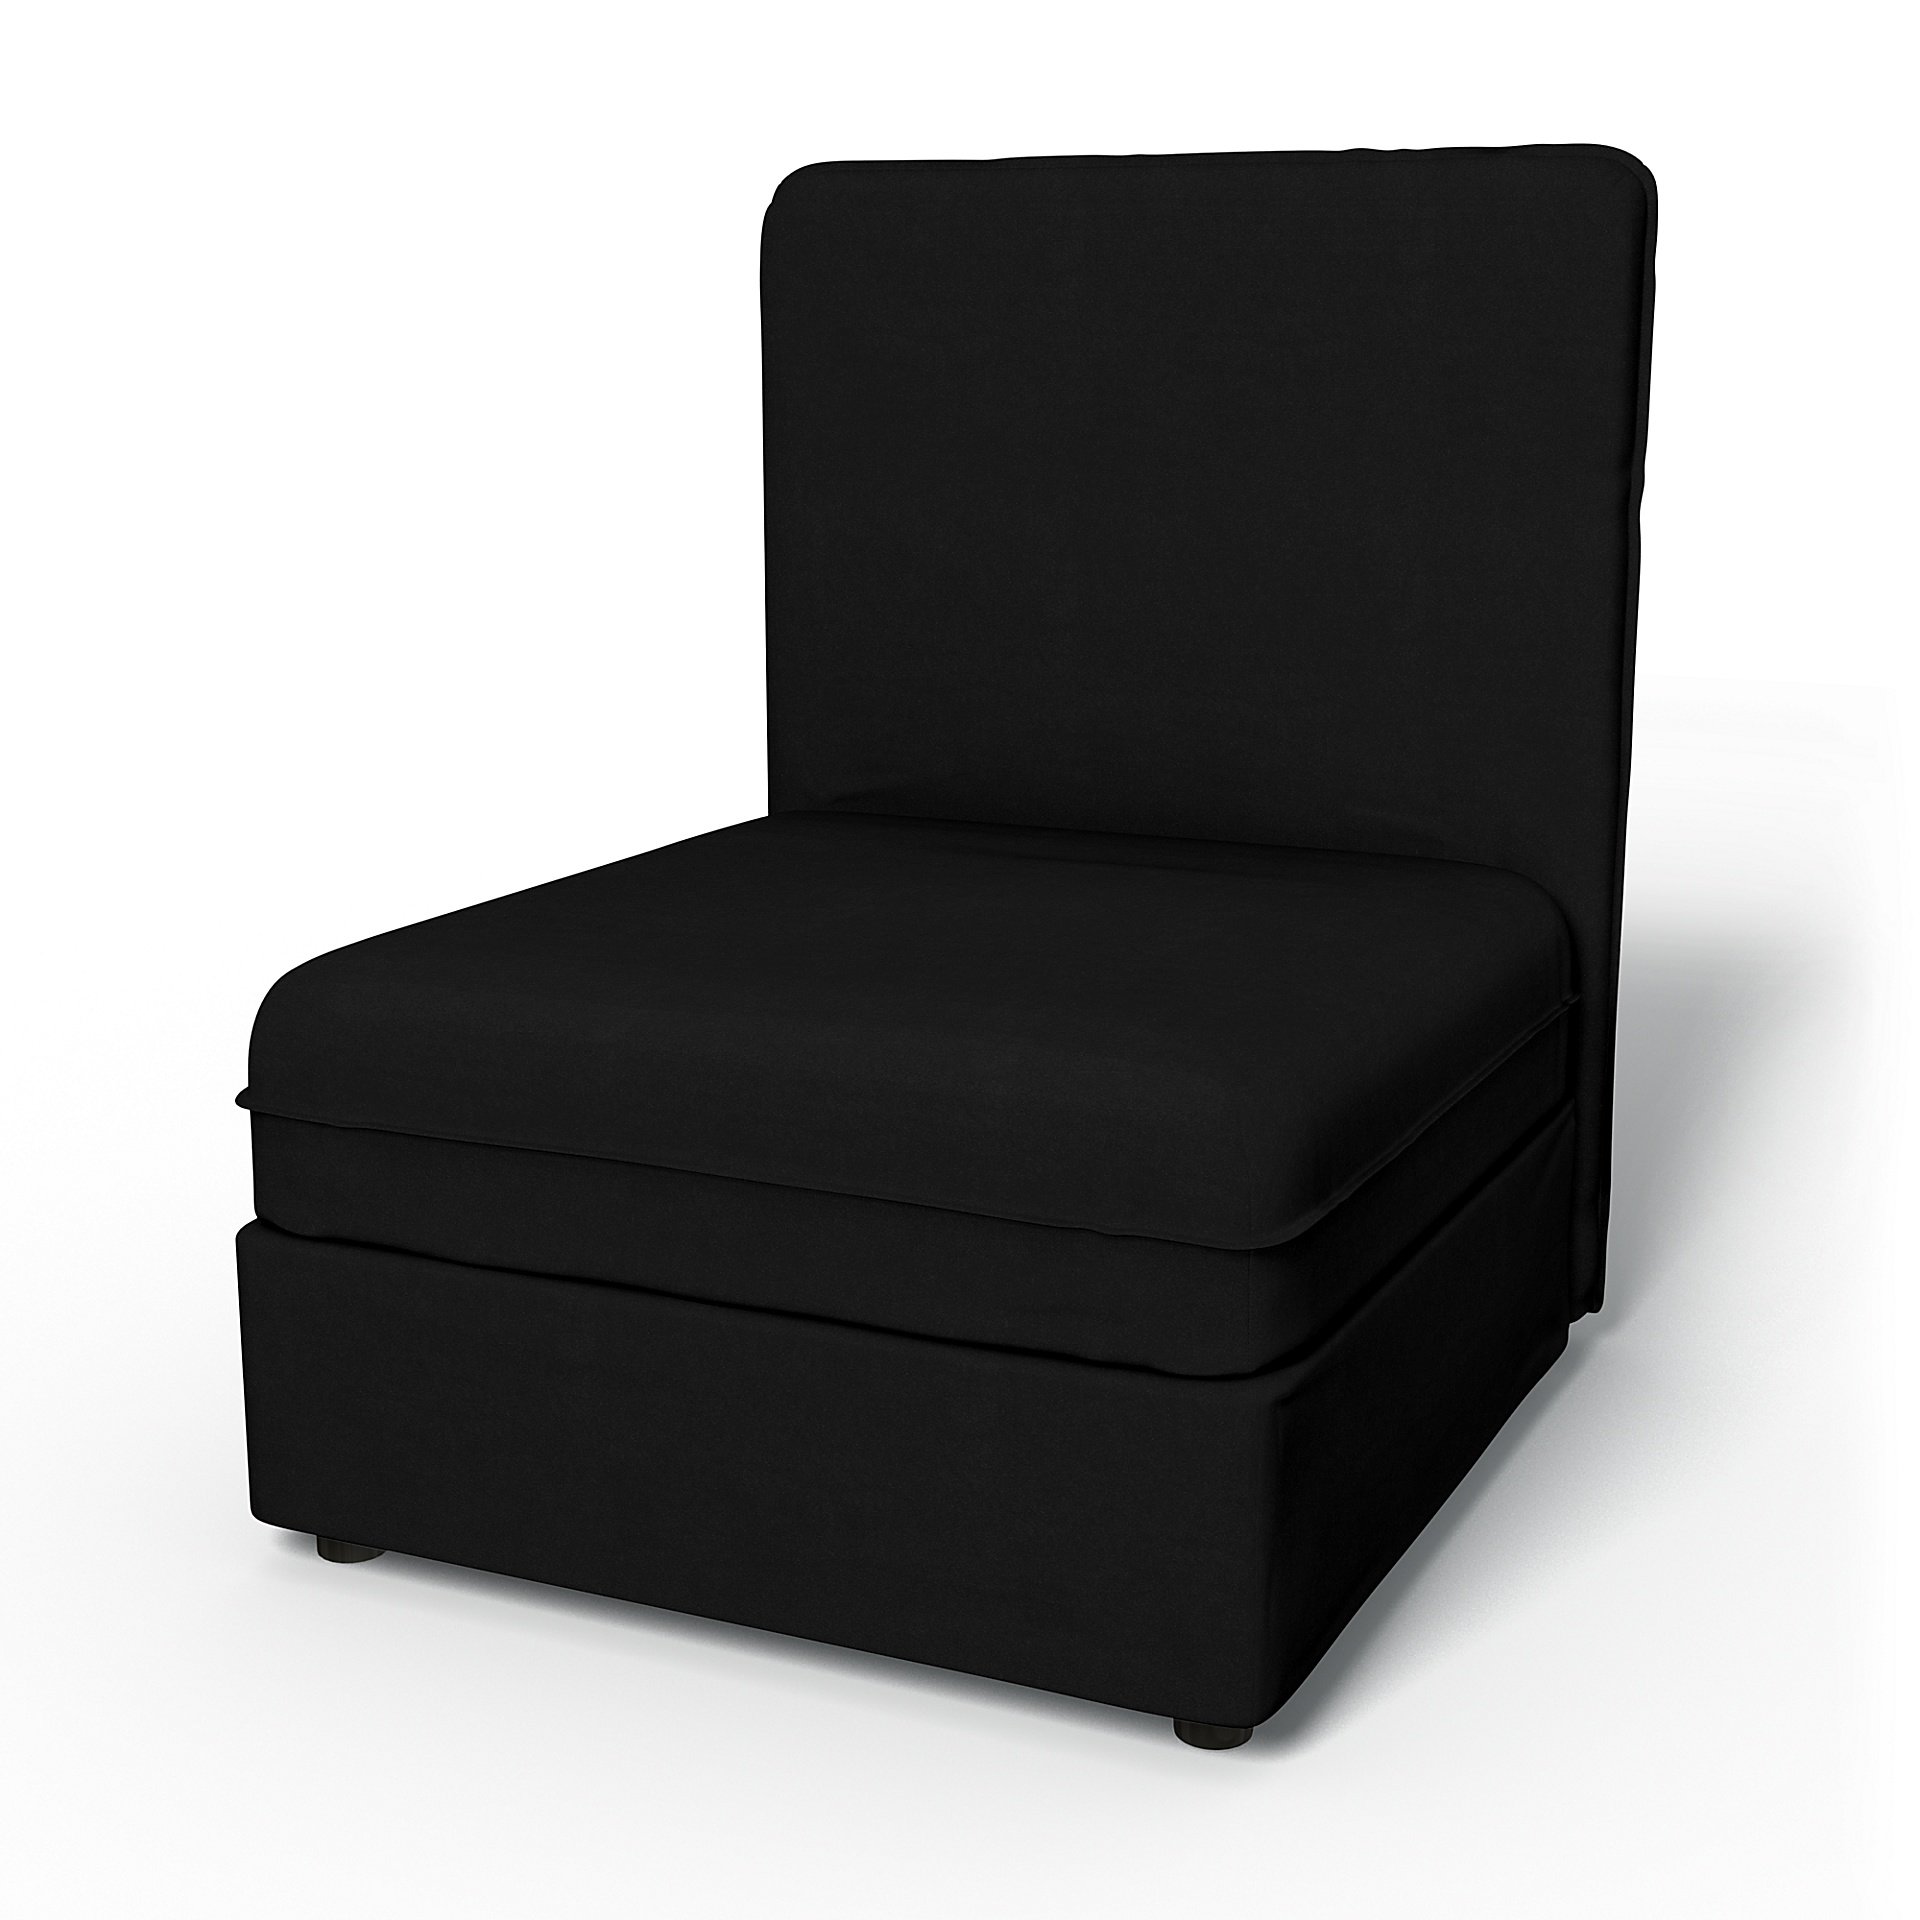 IKEA - Vallentuna Seat Module with High Back and Storage Cover 80x100cm 32x39in, Black, Velvet - Bem